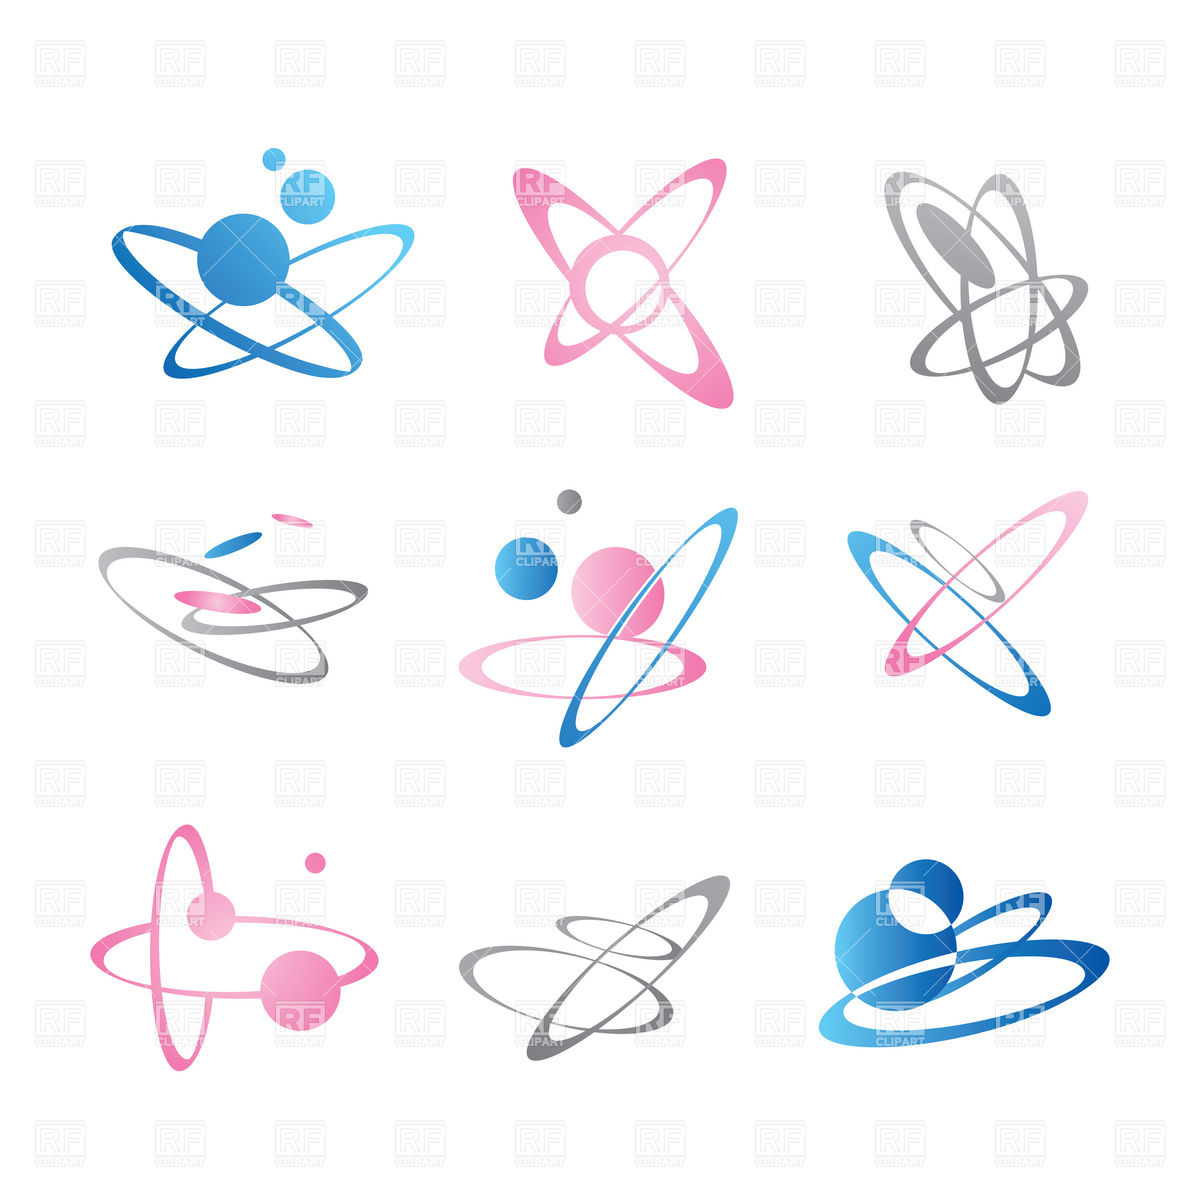 With Electrons On Orbit Download Royalty Free Vector Clipart  Eps